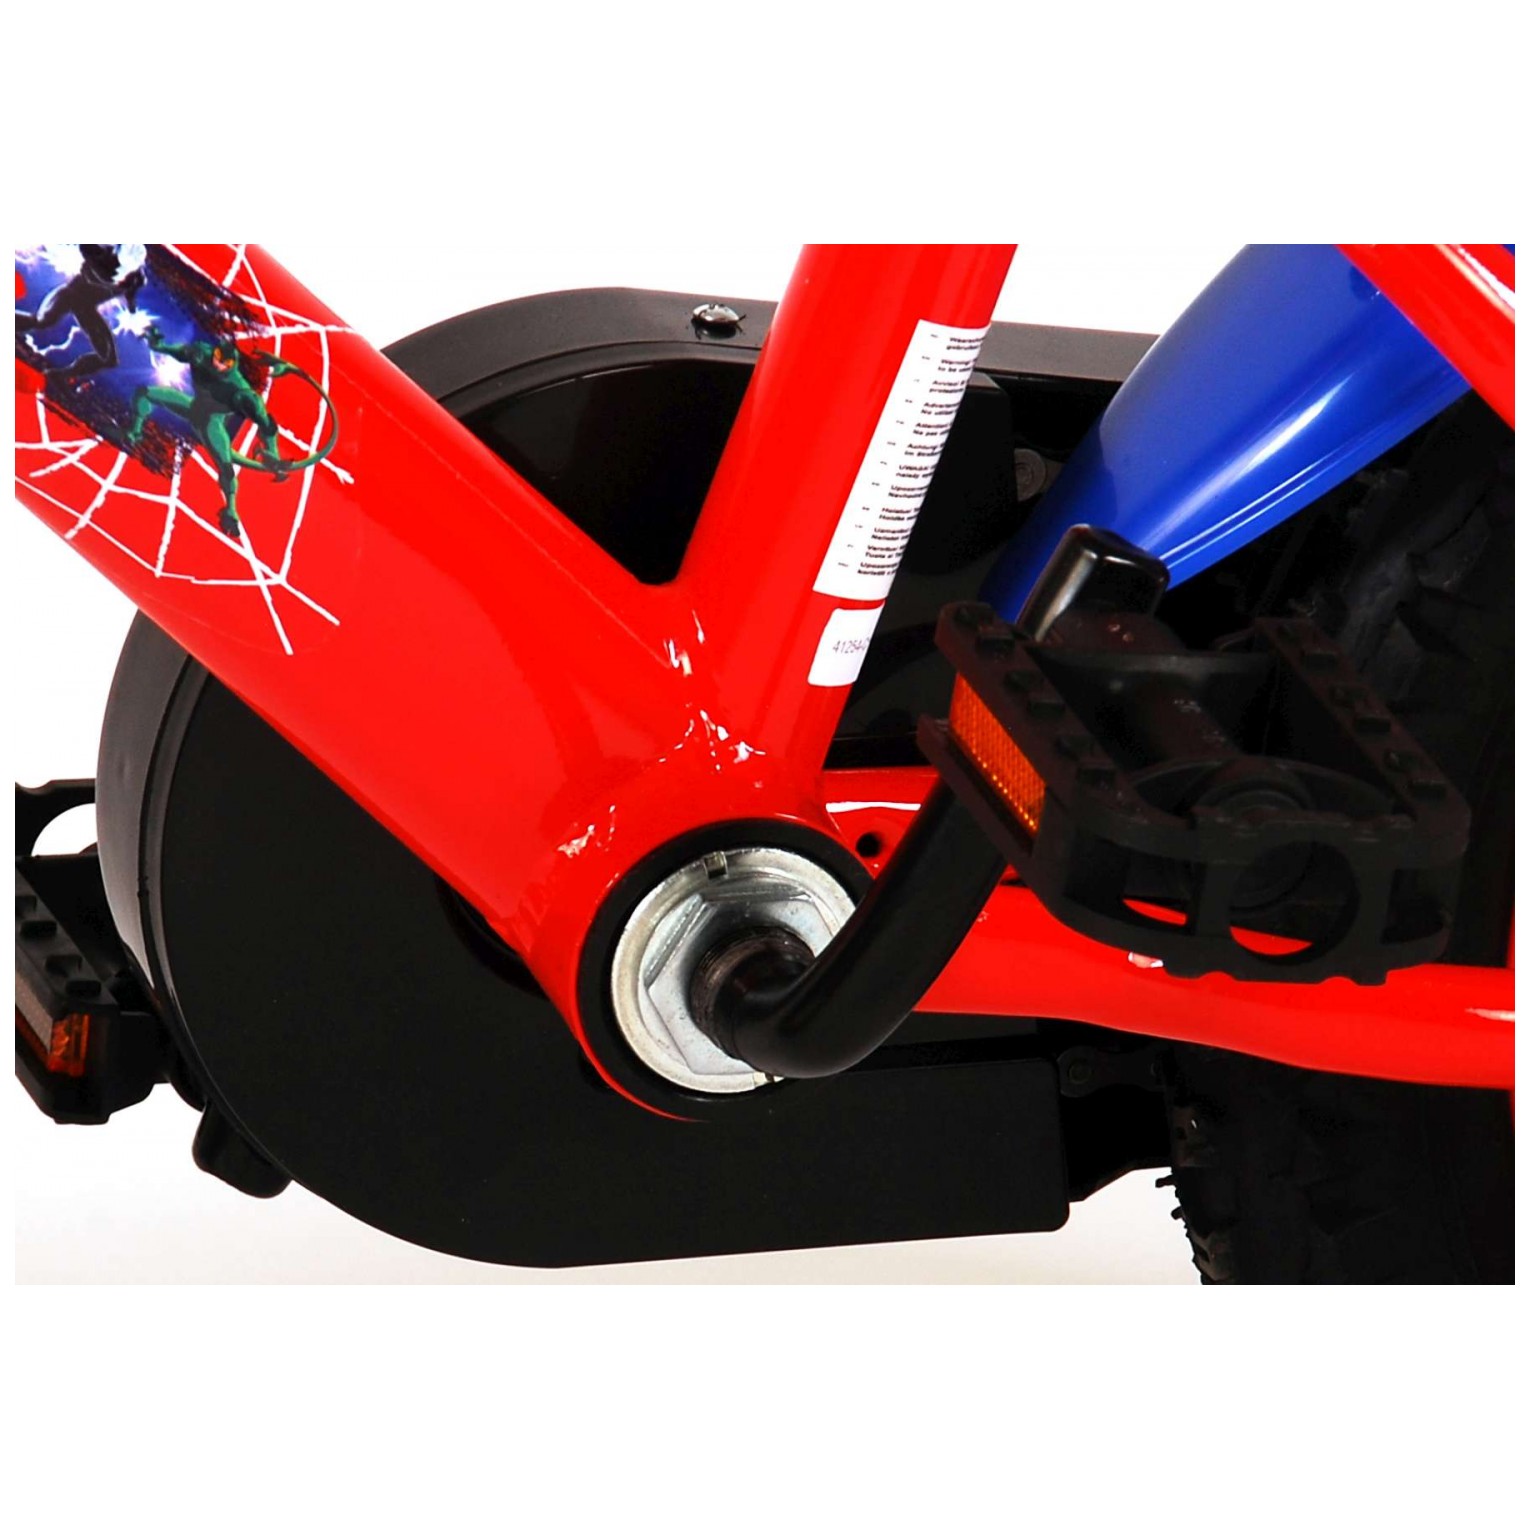 Ultimate Spider-Man Fiets - 12 inch - Blauw/Rood